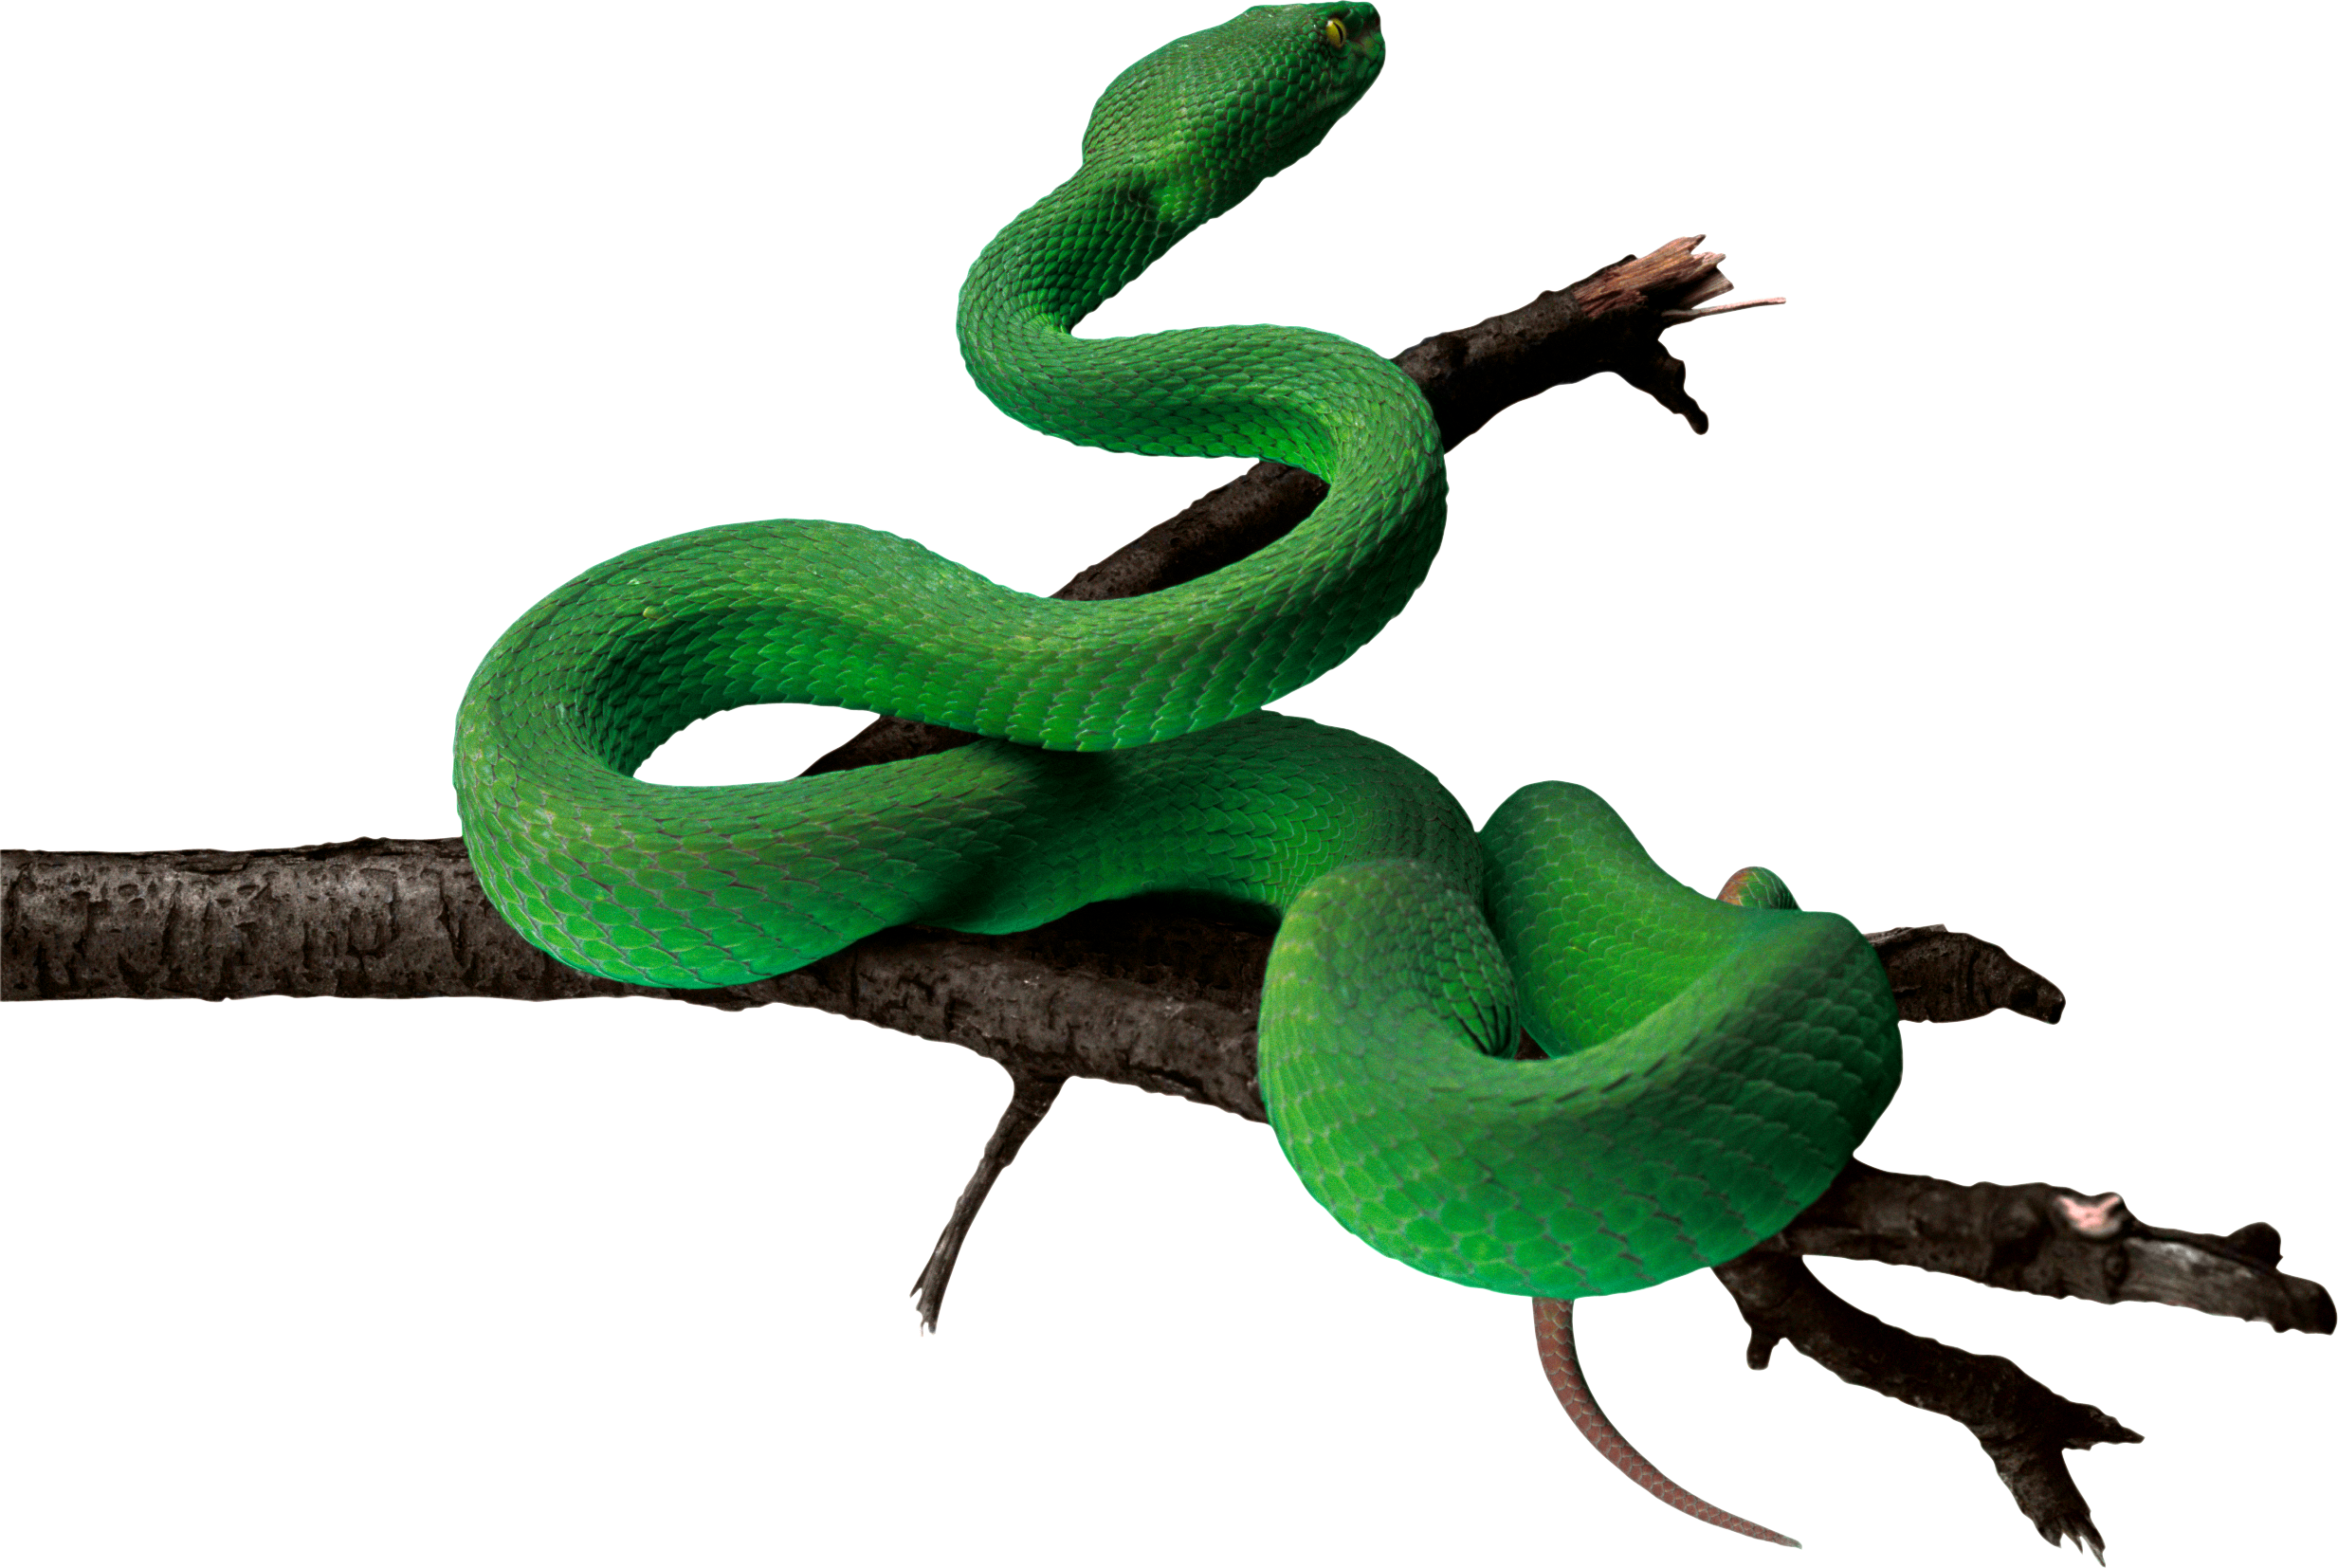 Coiled Snake PNG HD - 129044